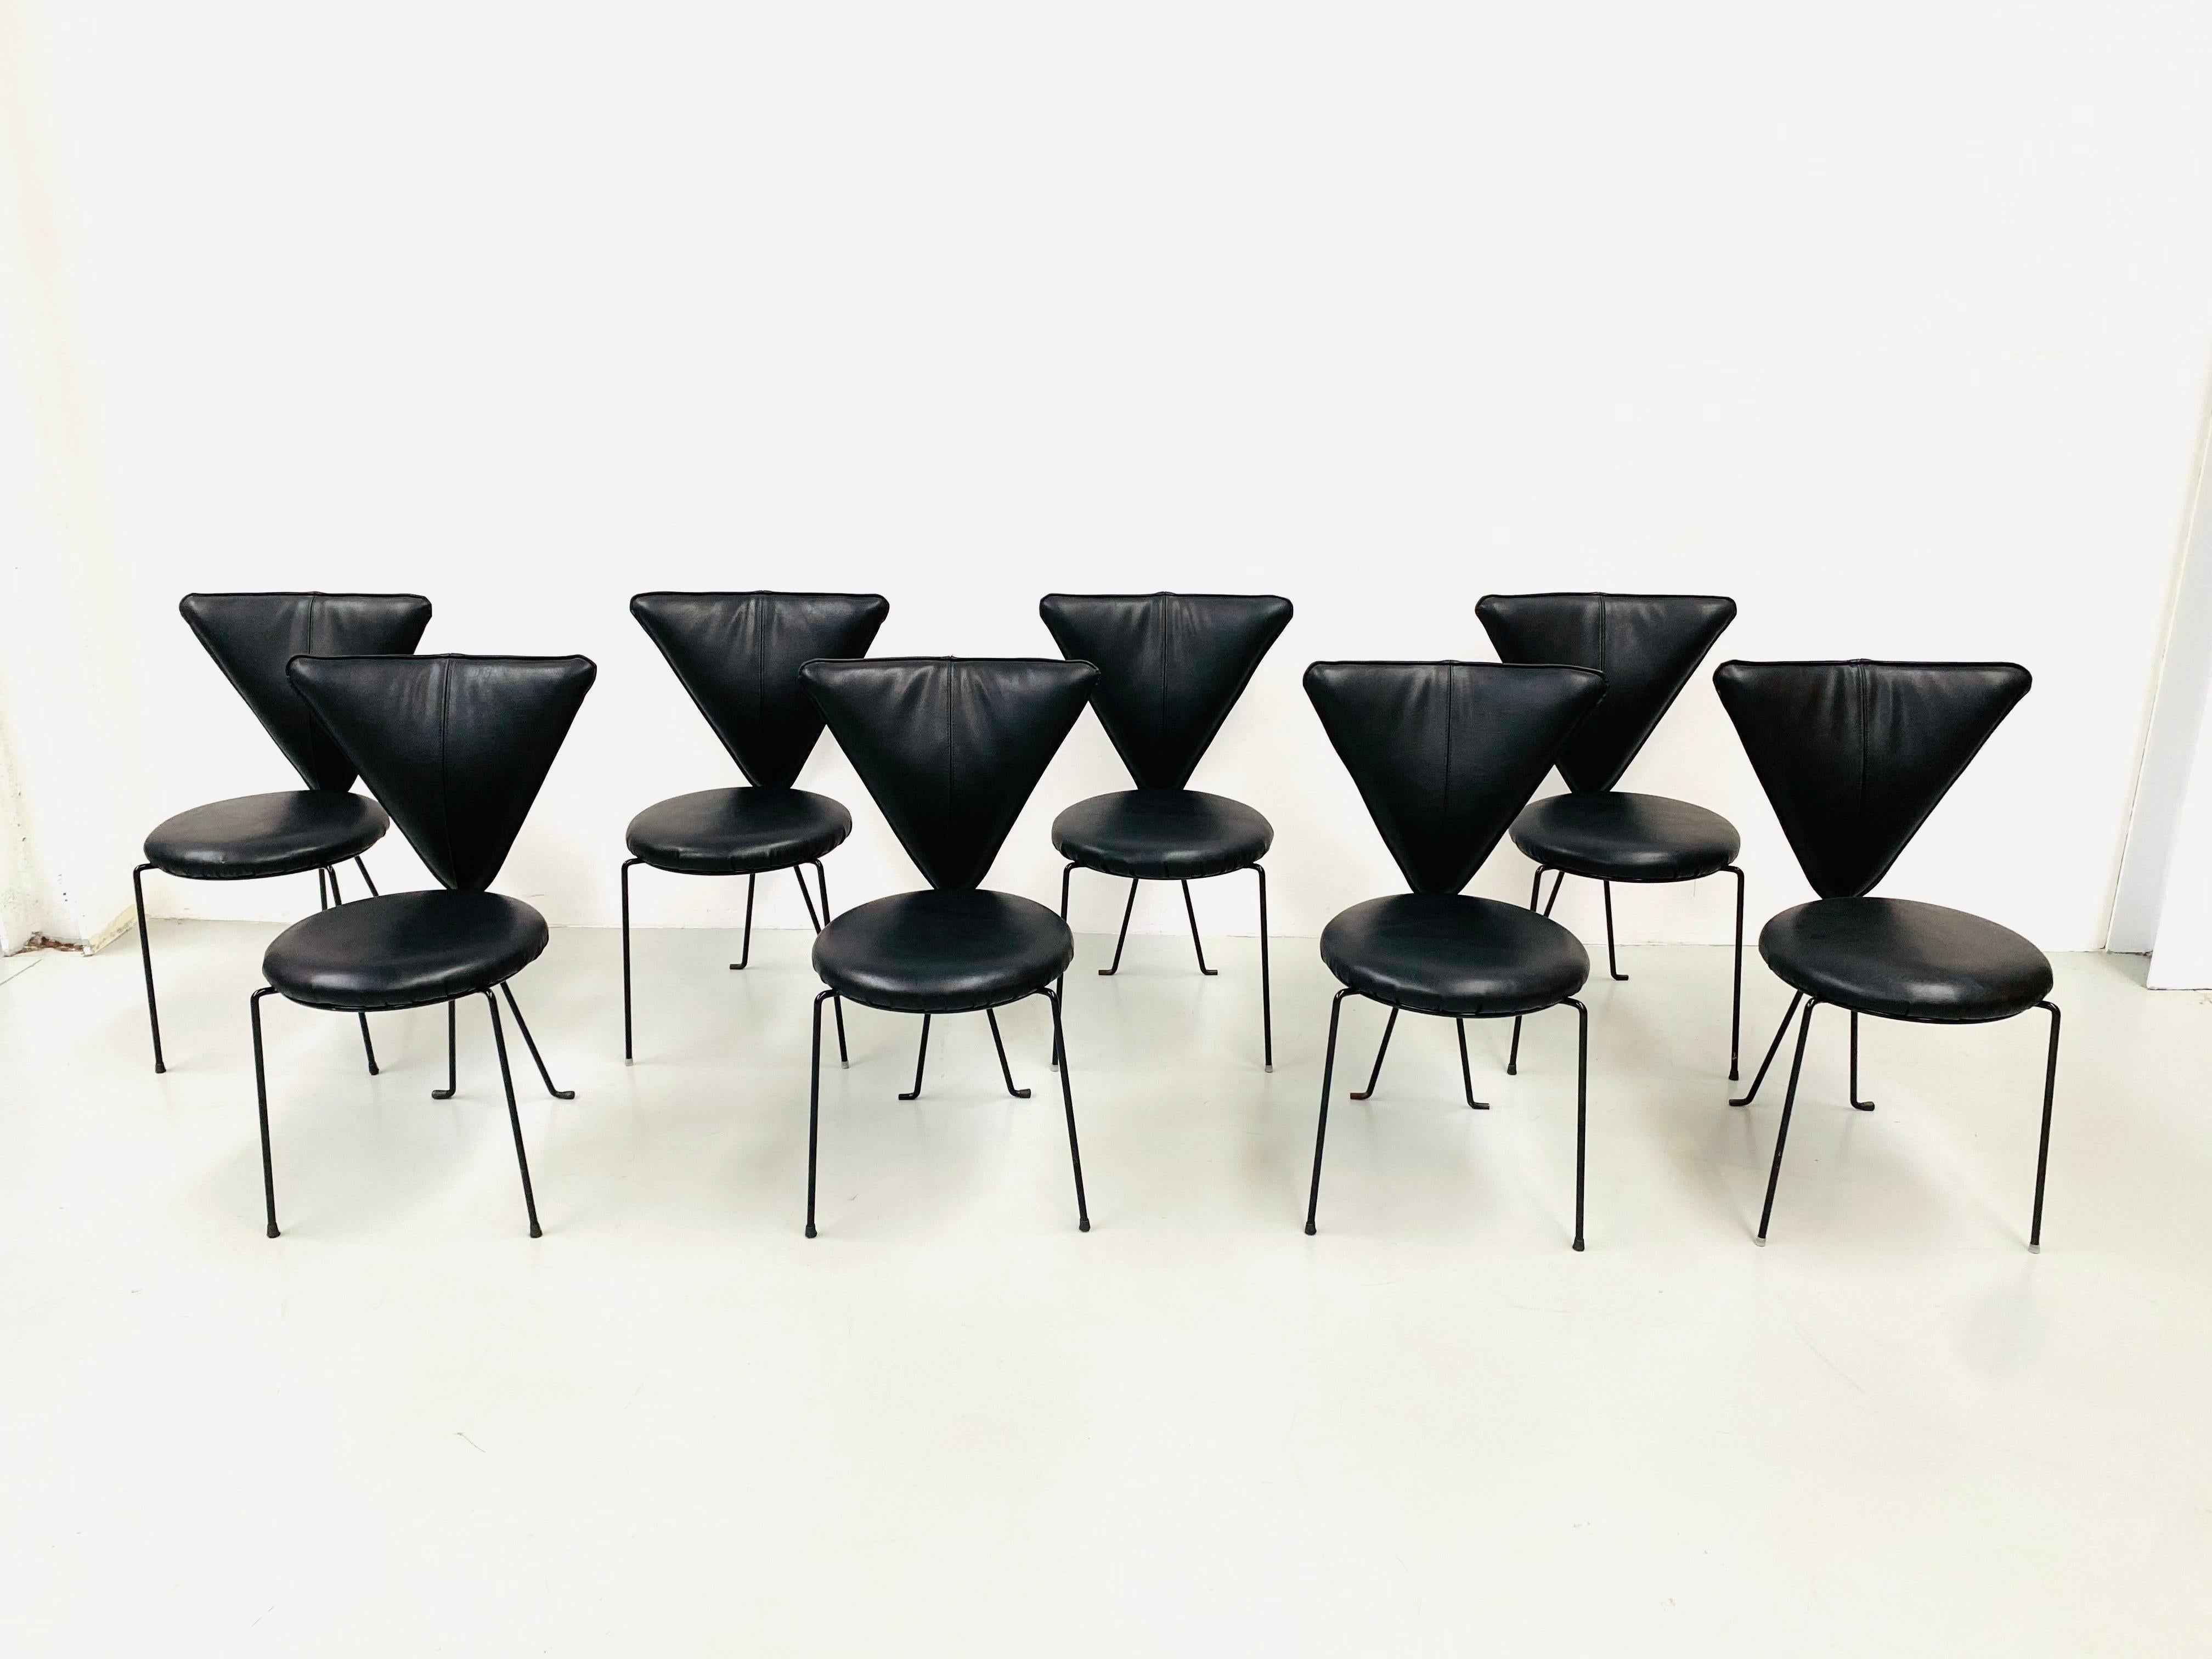 These 8 chairs were designed and manufactured by Helmut Lübke in the eighties. Each chair has its own serial number and the Lübke logo under the seat. Helmut Lübke was also the founder of the upholsterered furniture manufacturer COR.